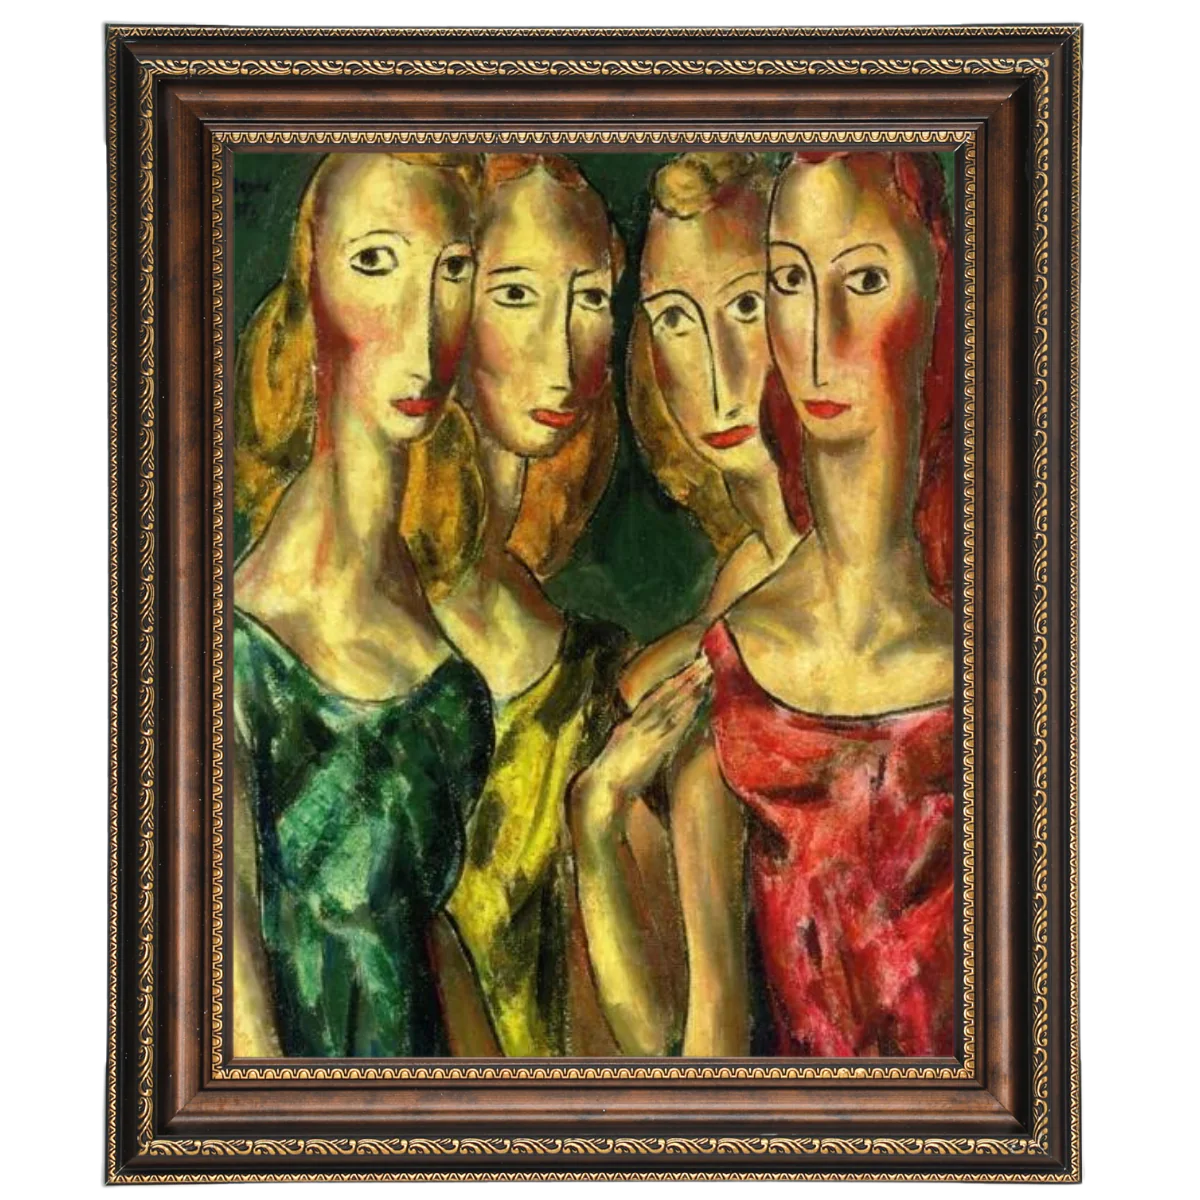 Four Sisters- Vintage Wall Art Prints Decor For Living Room